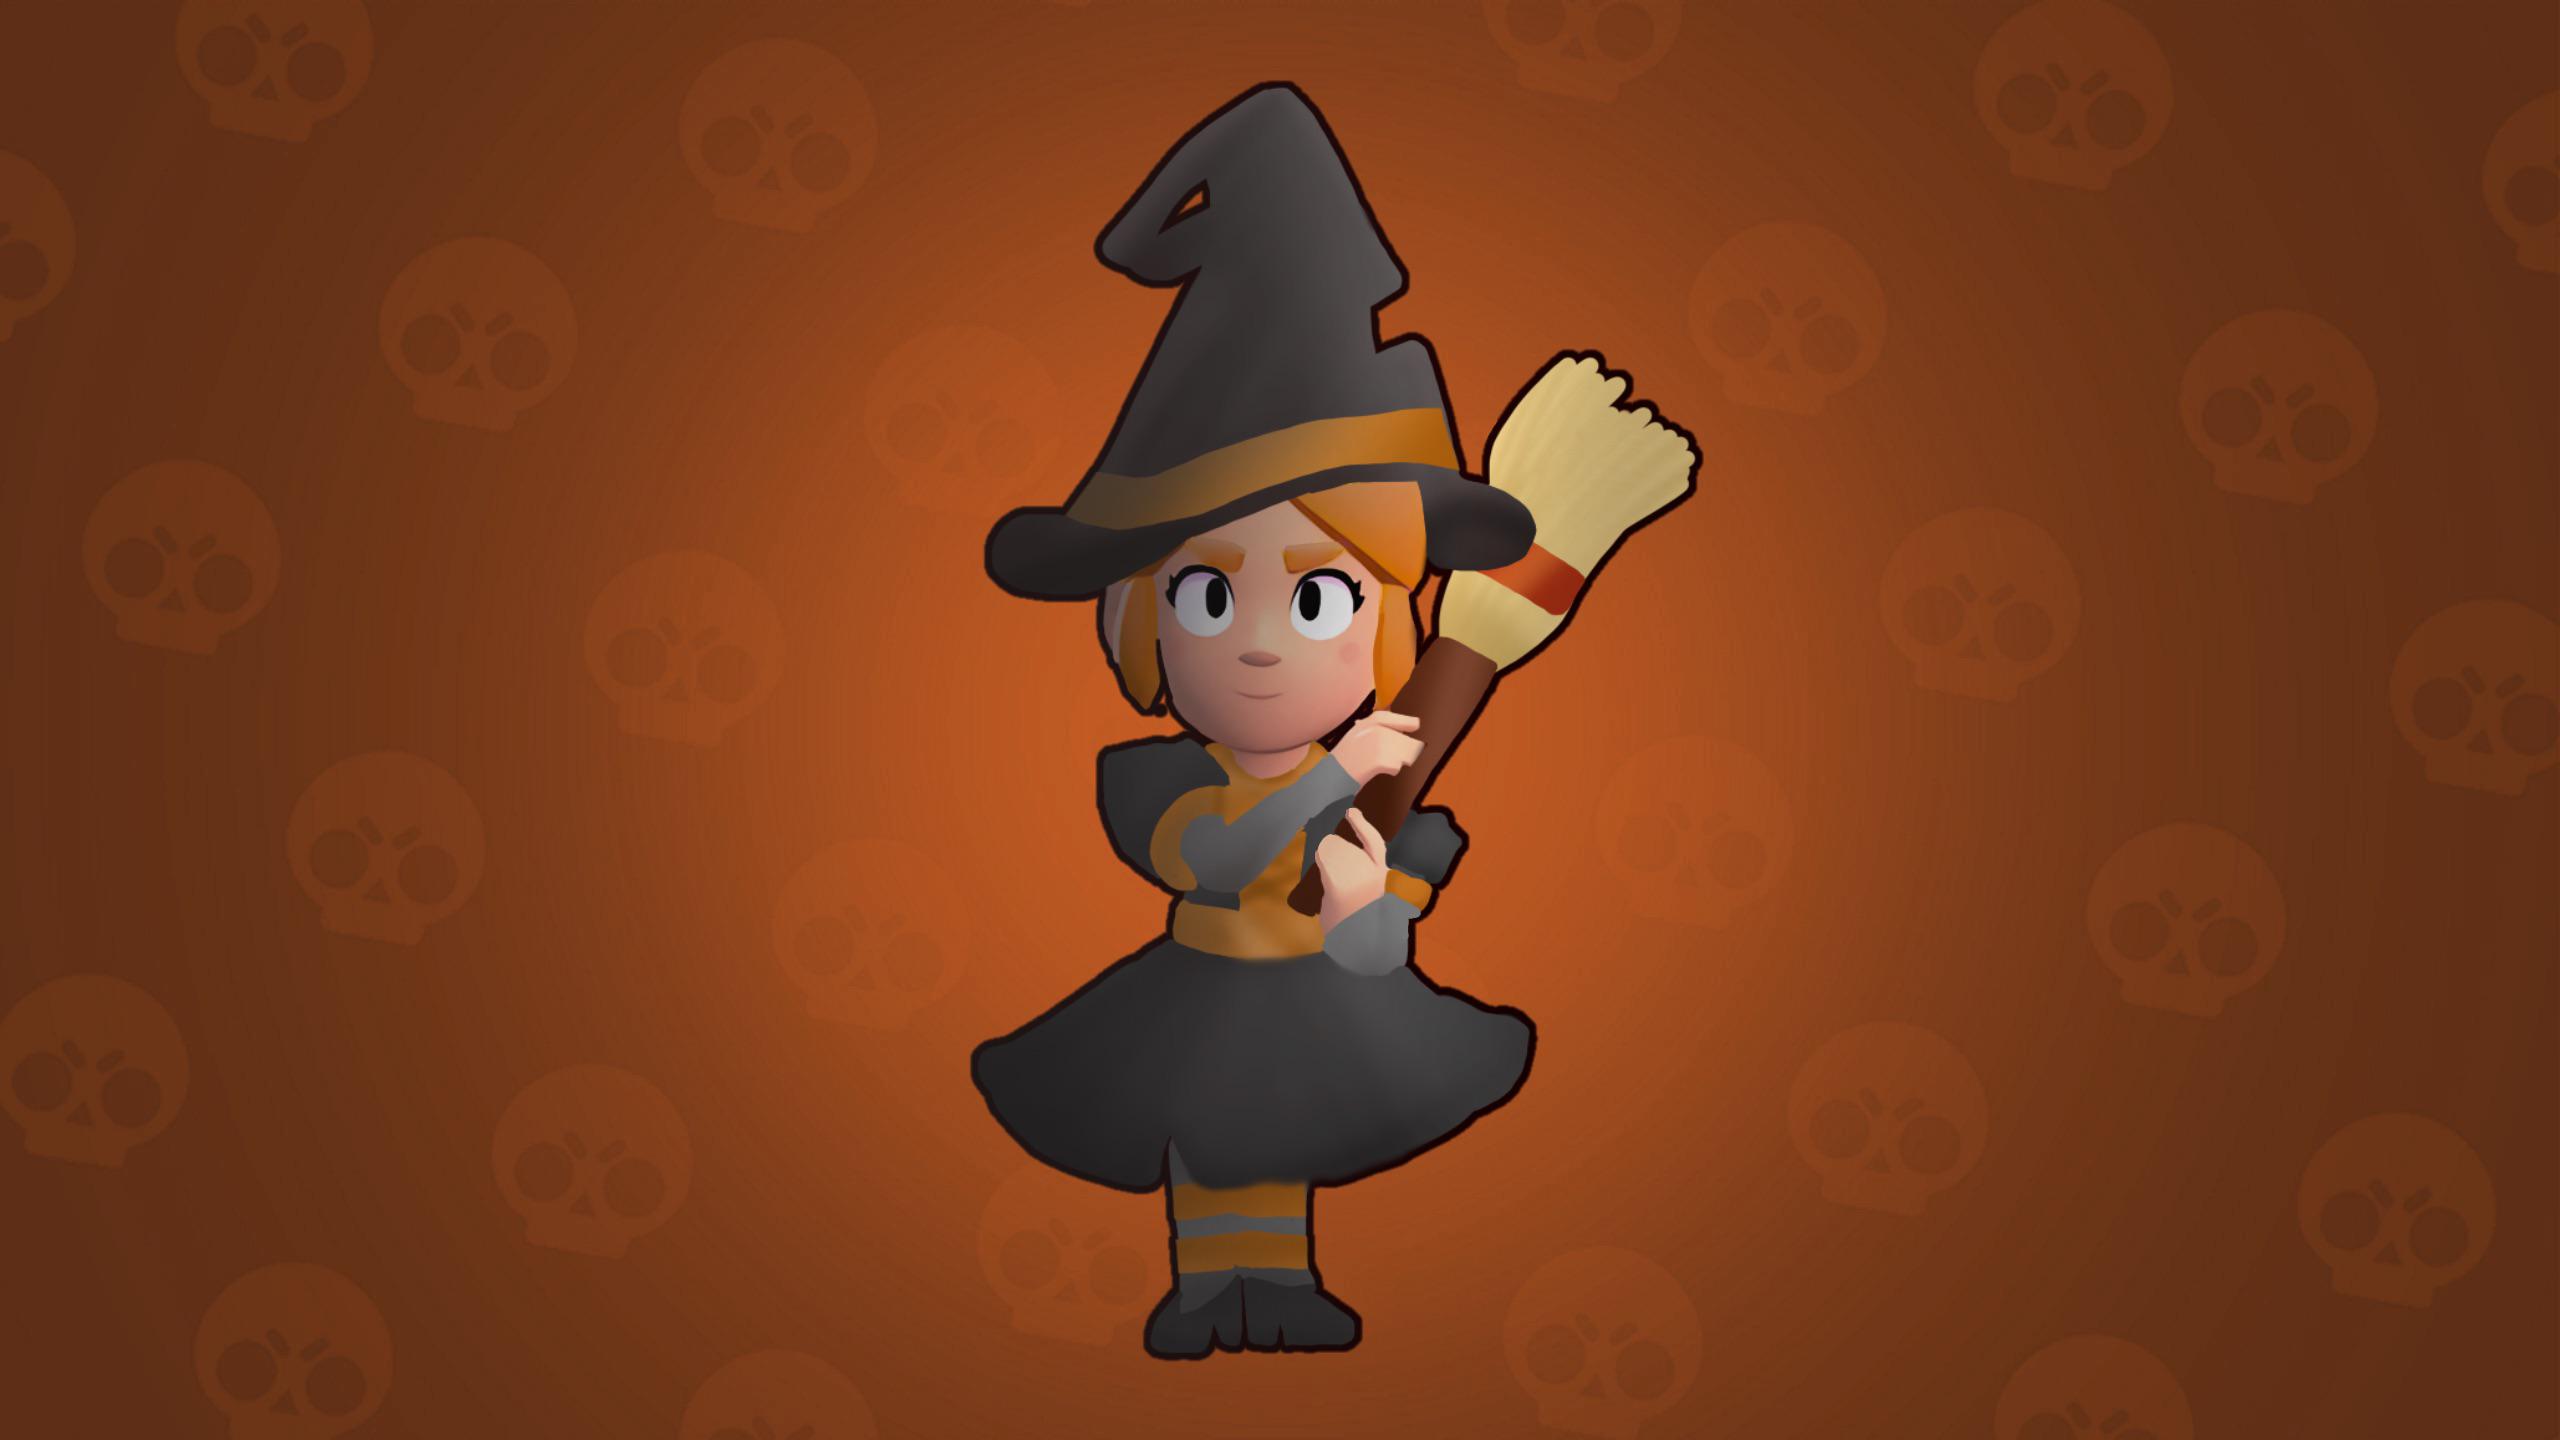 I made a Witch Piper skin for Halloween